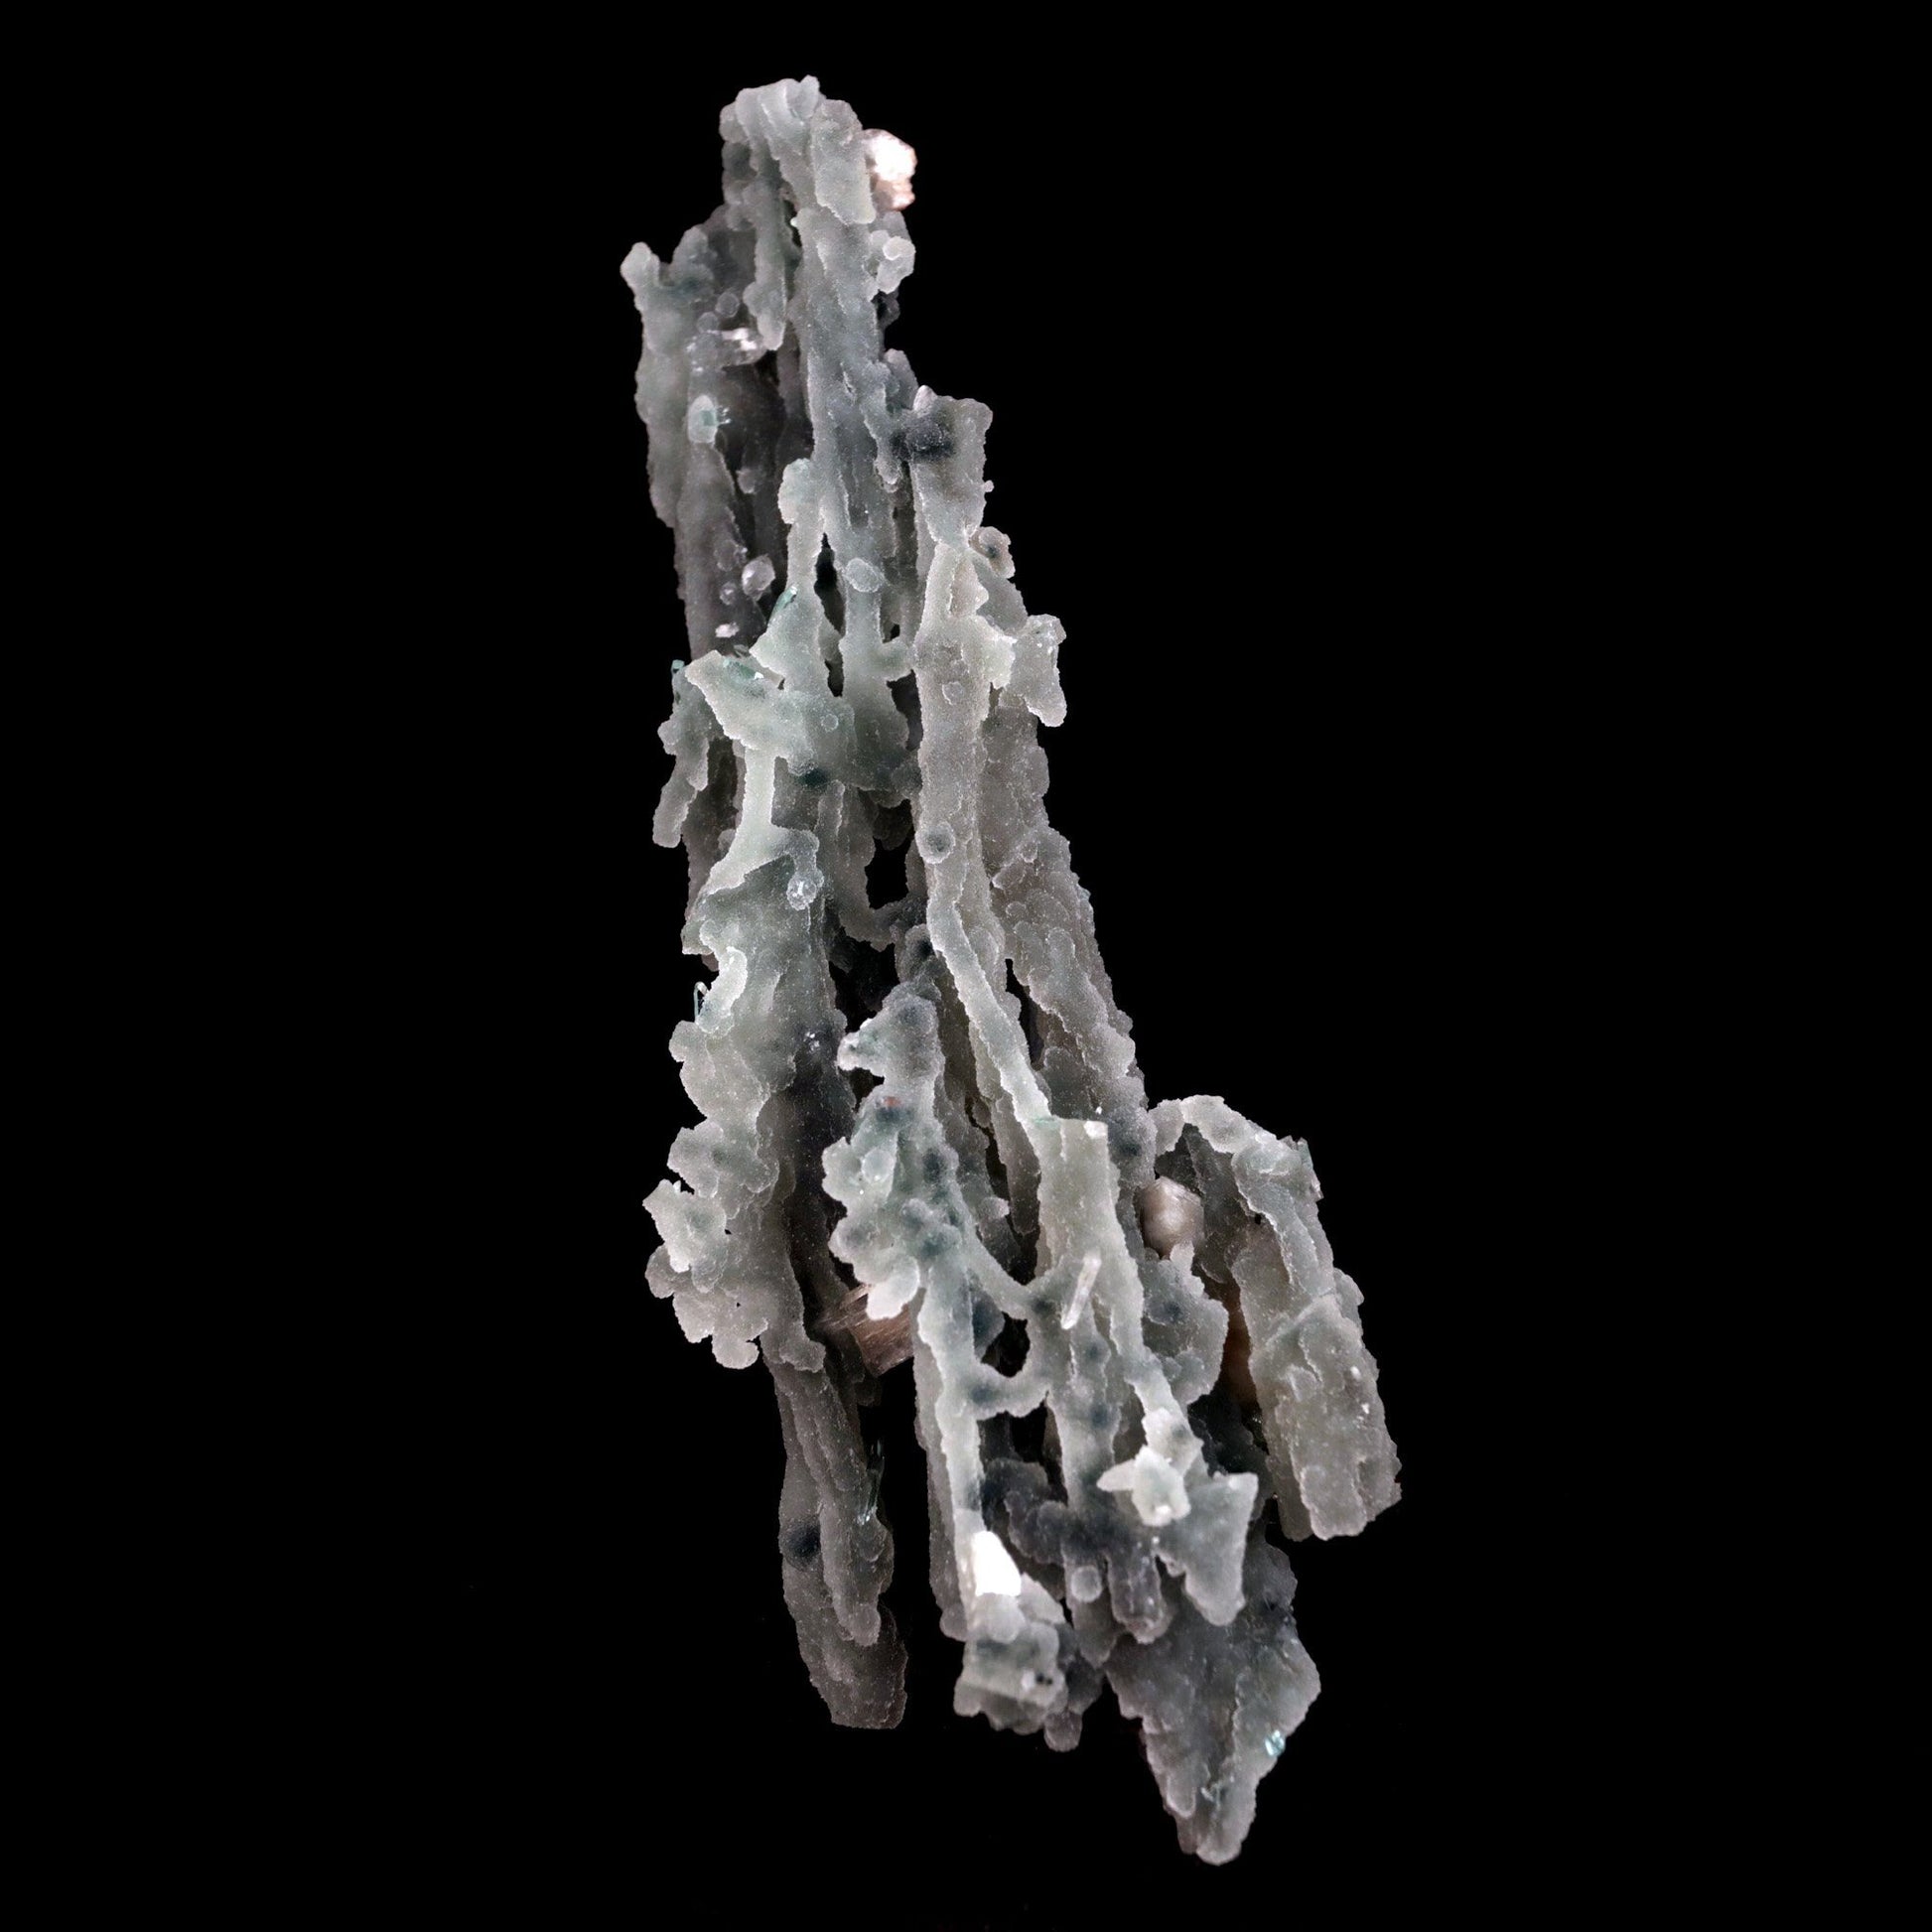 Stilbite on Chalcedony Coral Natural Mineral Specimen # B 4827  https://www.superbminerals.us/products/stilbite-on-chalcedony-coral-natural-mineral-specimen-b-4827  Features: Stalactites of drusy greenish-gray chalcedony dangle from a stunning corsage of iridescent, salmon-pink stilbite bowties. The matrix is highly sculptural.With only a few touched stalactite tips, this piece is essentially flawless and looks great from all angles!Outstanding huge Jalgaon combo